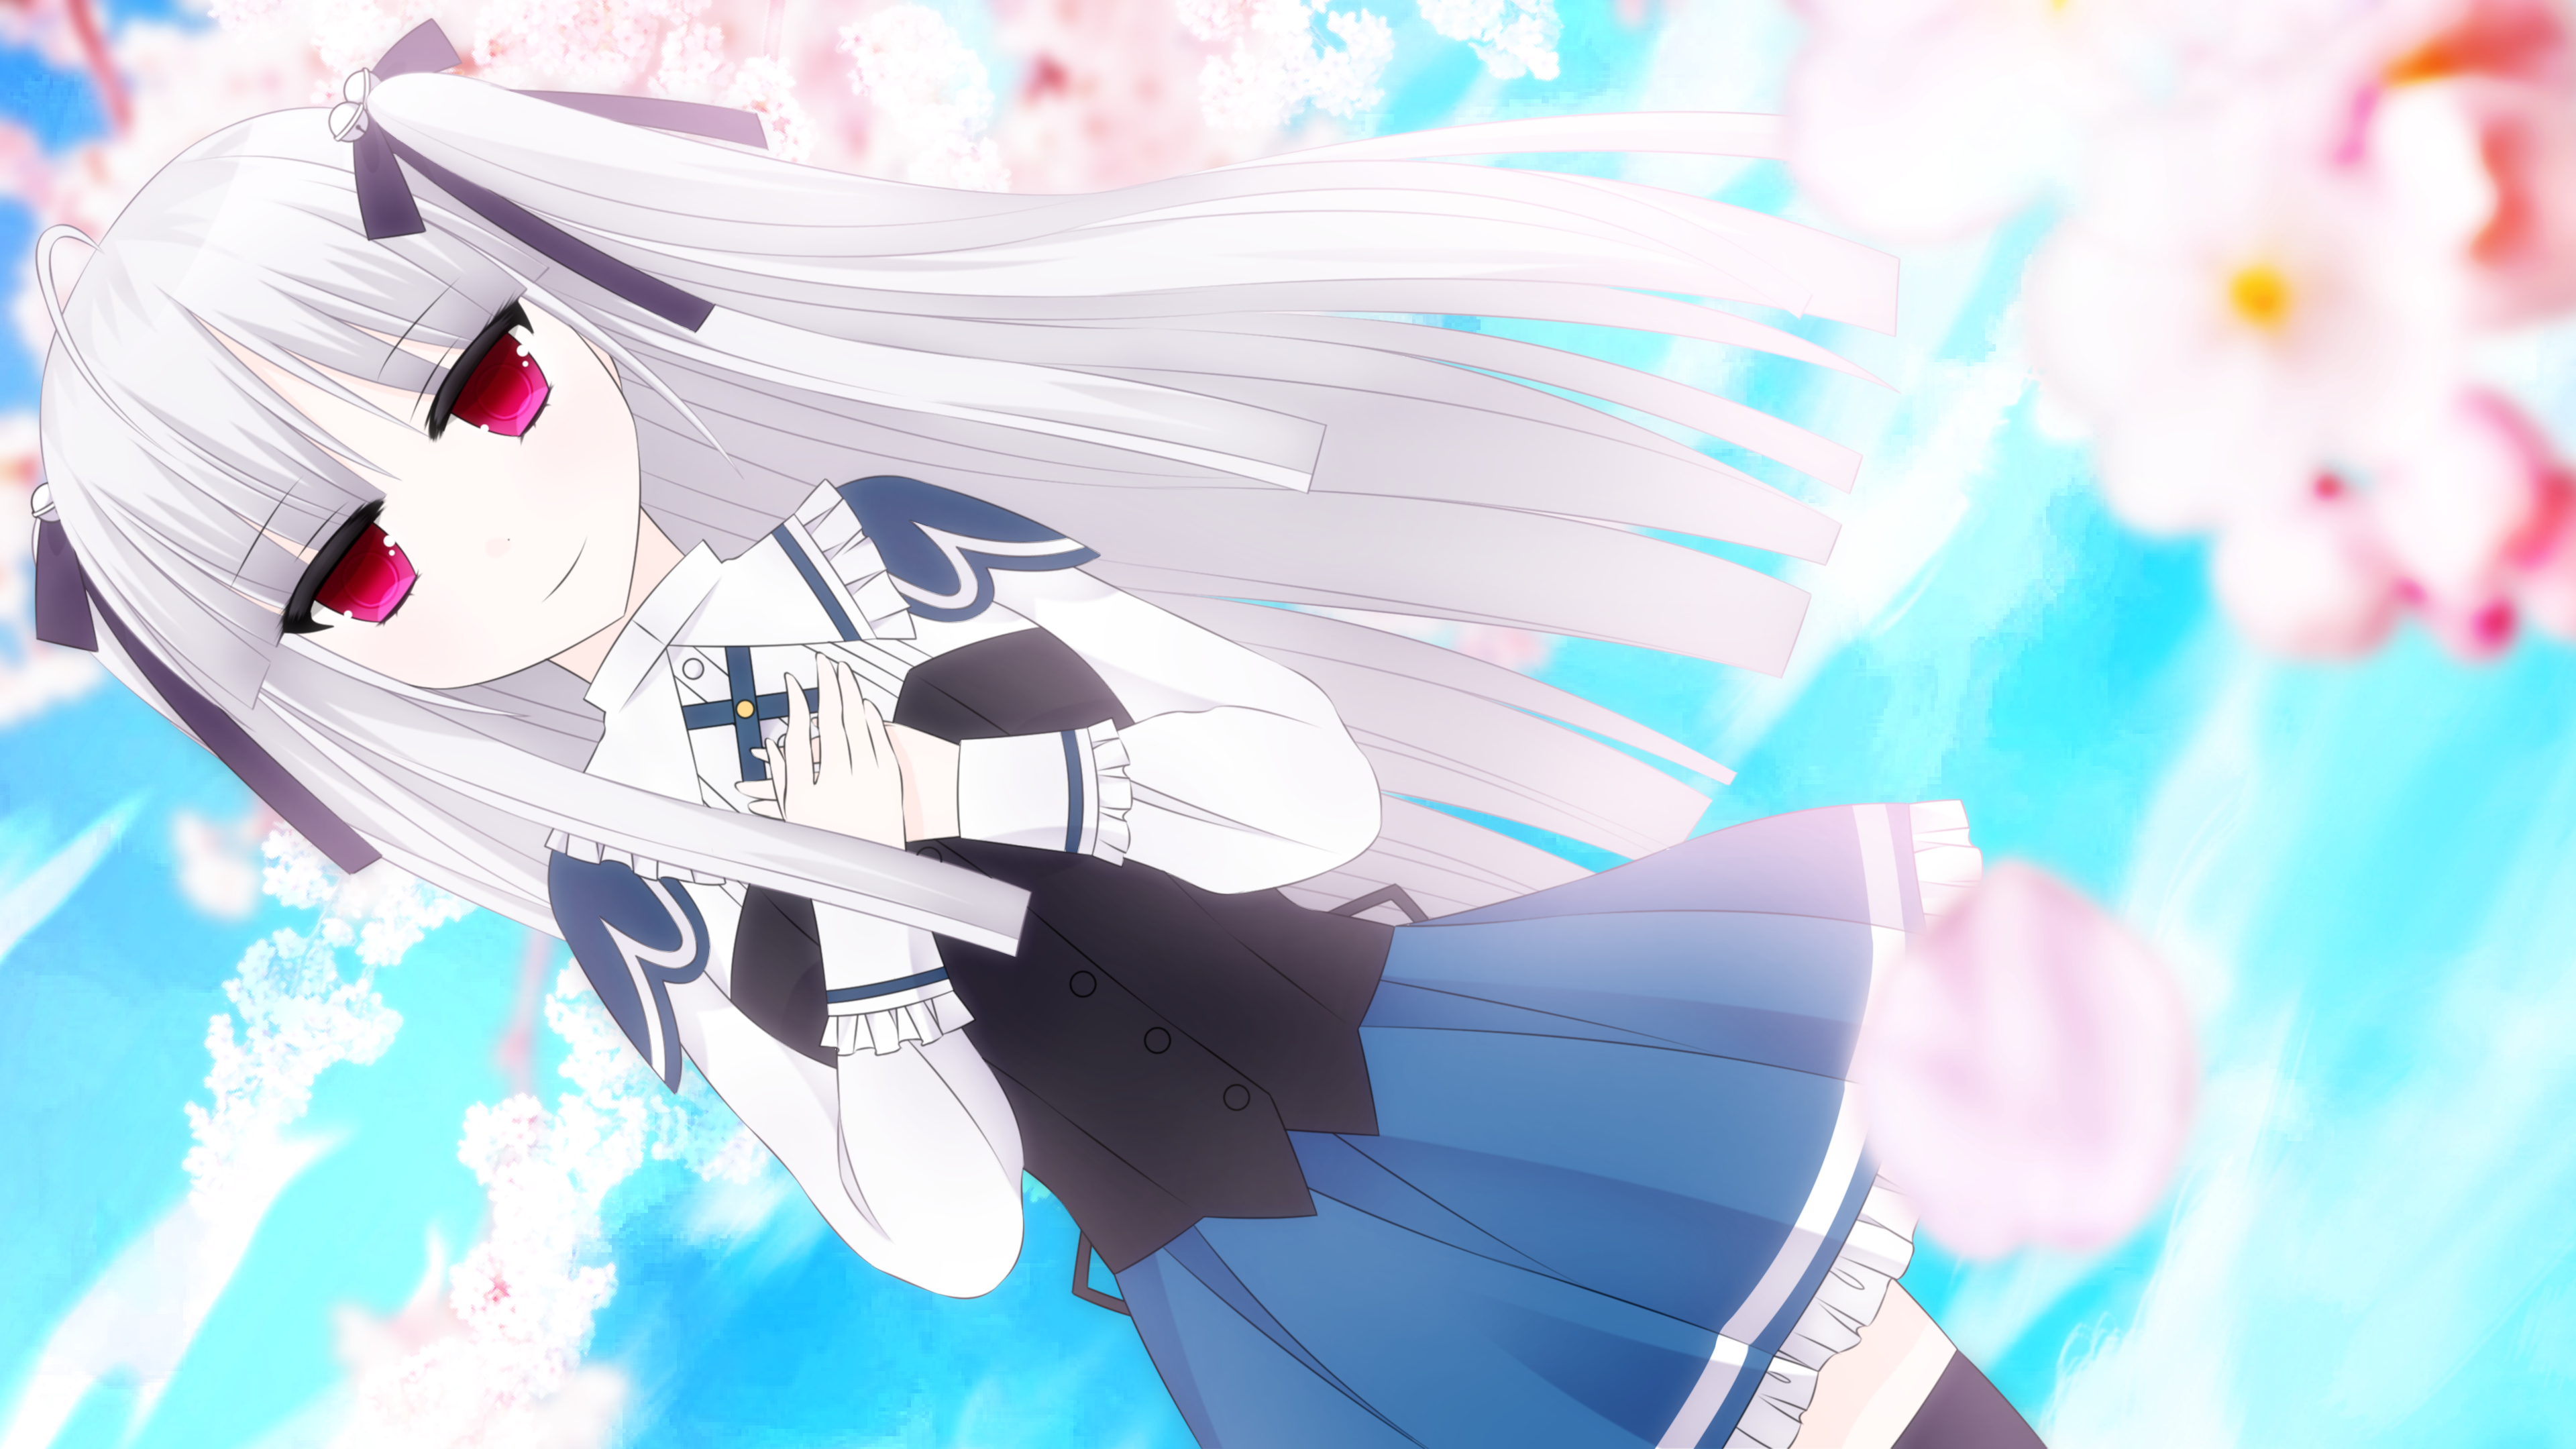 Anime Absolute Duo HD Wallpaper | Background Image